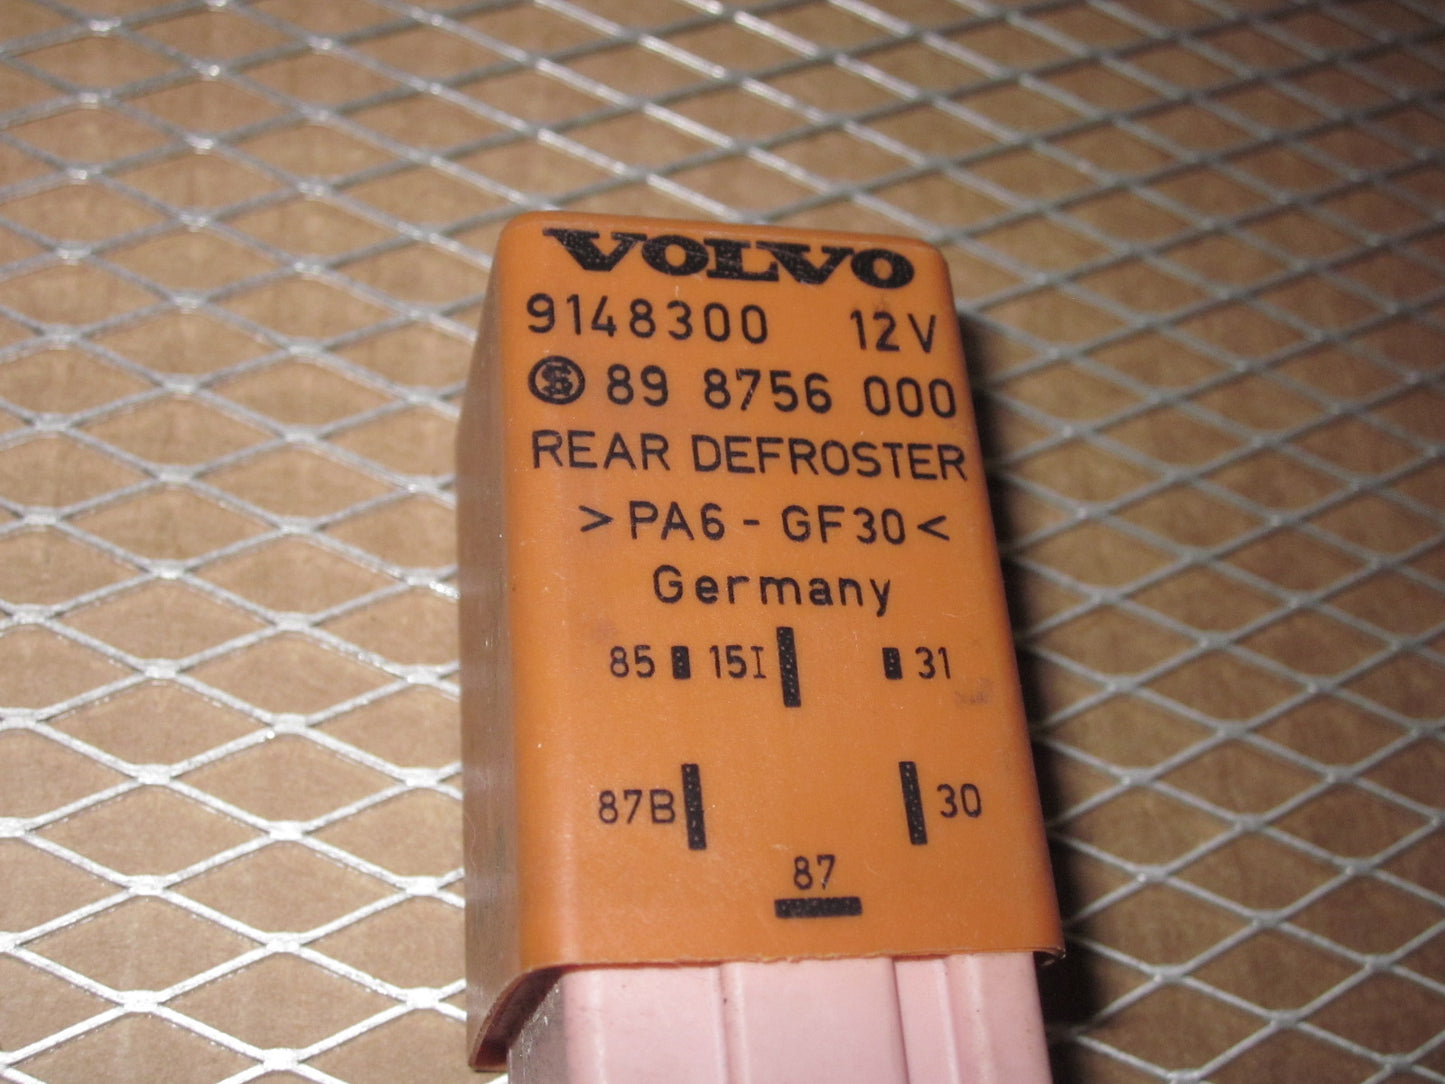 Volvo Rear Defroster Relay A 208 / 9148300 / 89 8756 000